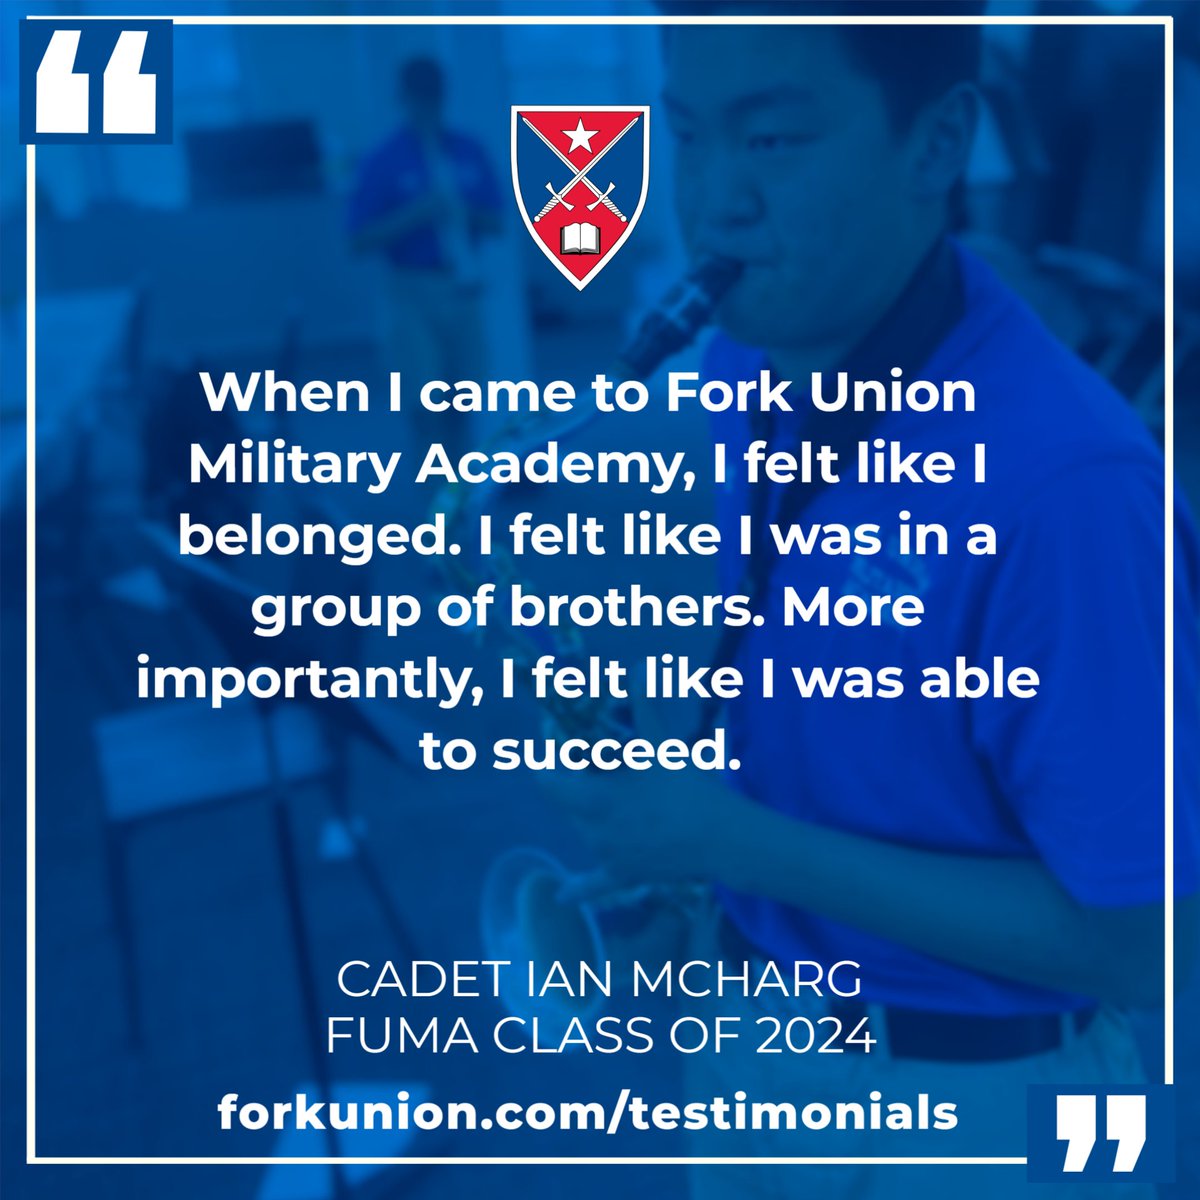 It is a #TuesdayTestimonial day! Do you have a FUMA testimonial to share? Share your story at hubs.ly/Q02x6RHF0

#forkunion